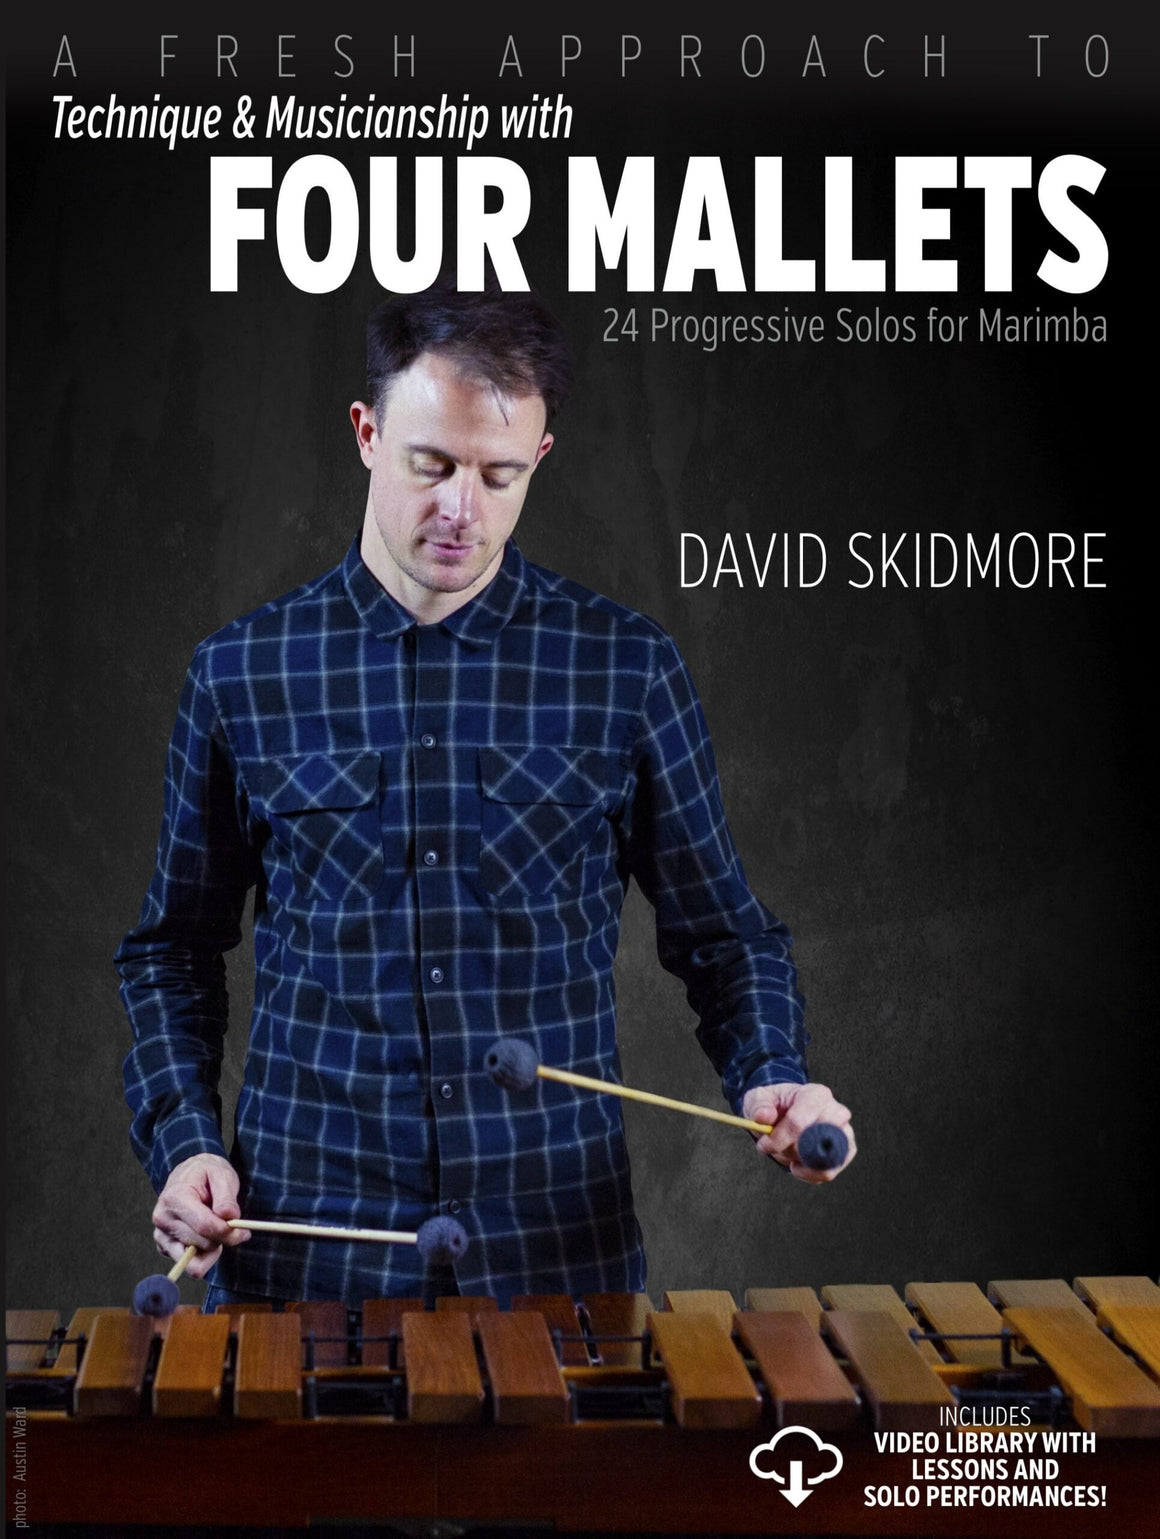 WESSELS PUBLIS FATMFM A Fresh Approach to Technique and Musicianship with Four Mallets by David Skidmore